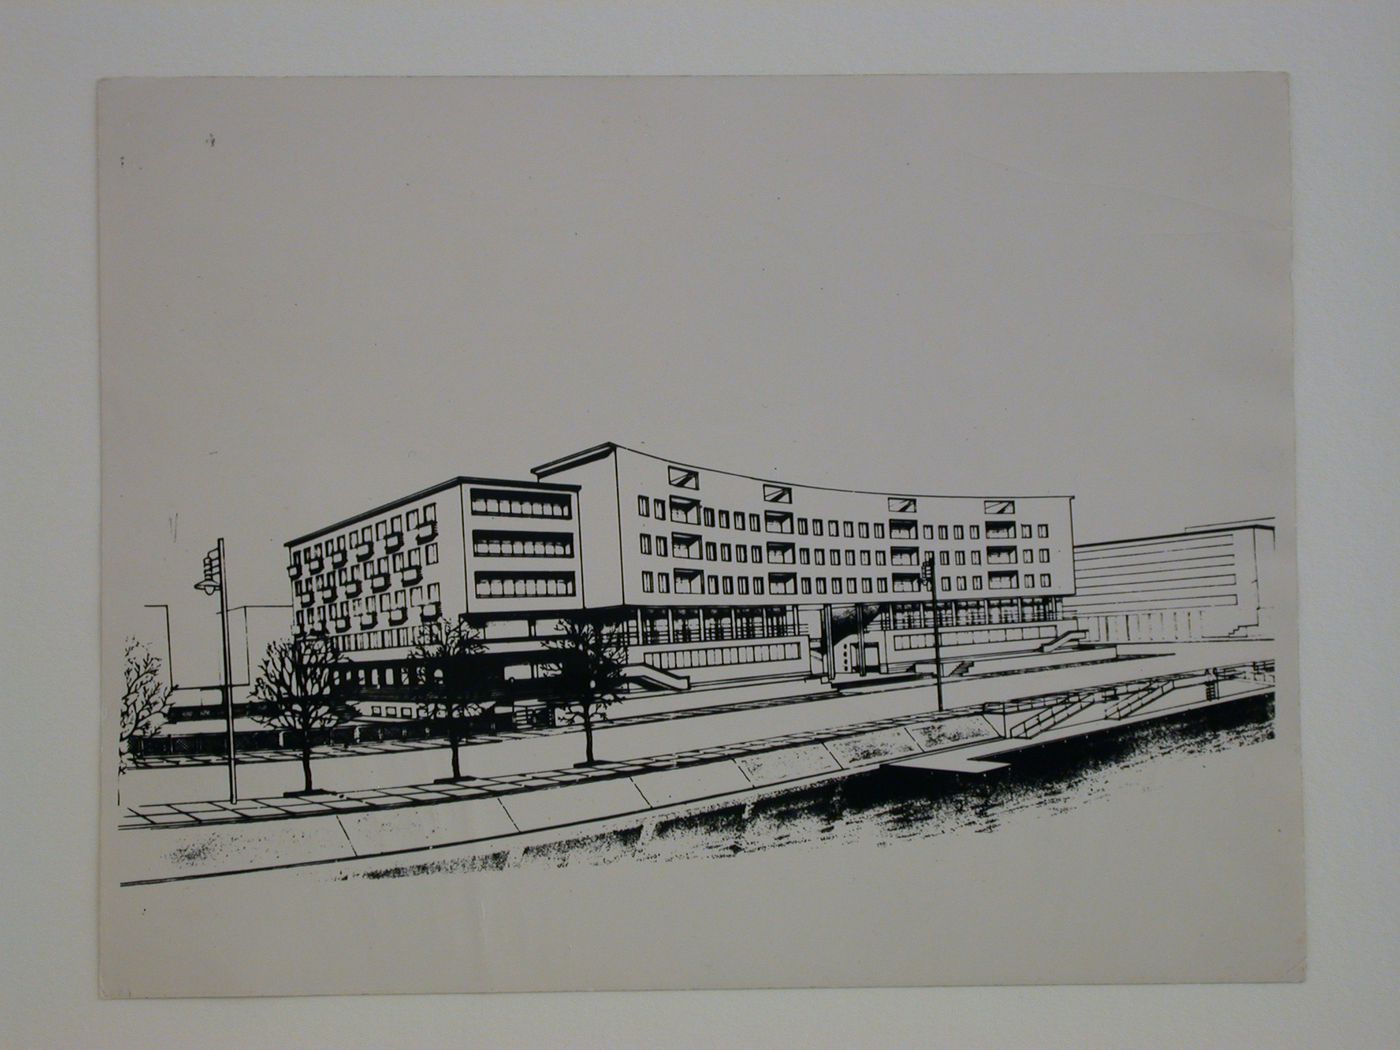 Photograph of a perspective drawing for the First Building of Lensovet (Leningrad Union), Leningrad (now Saint Petersburg)